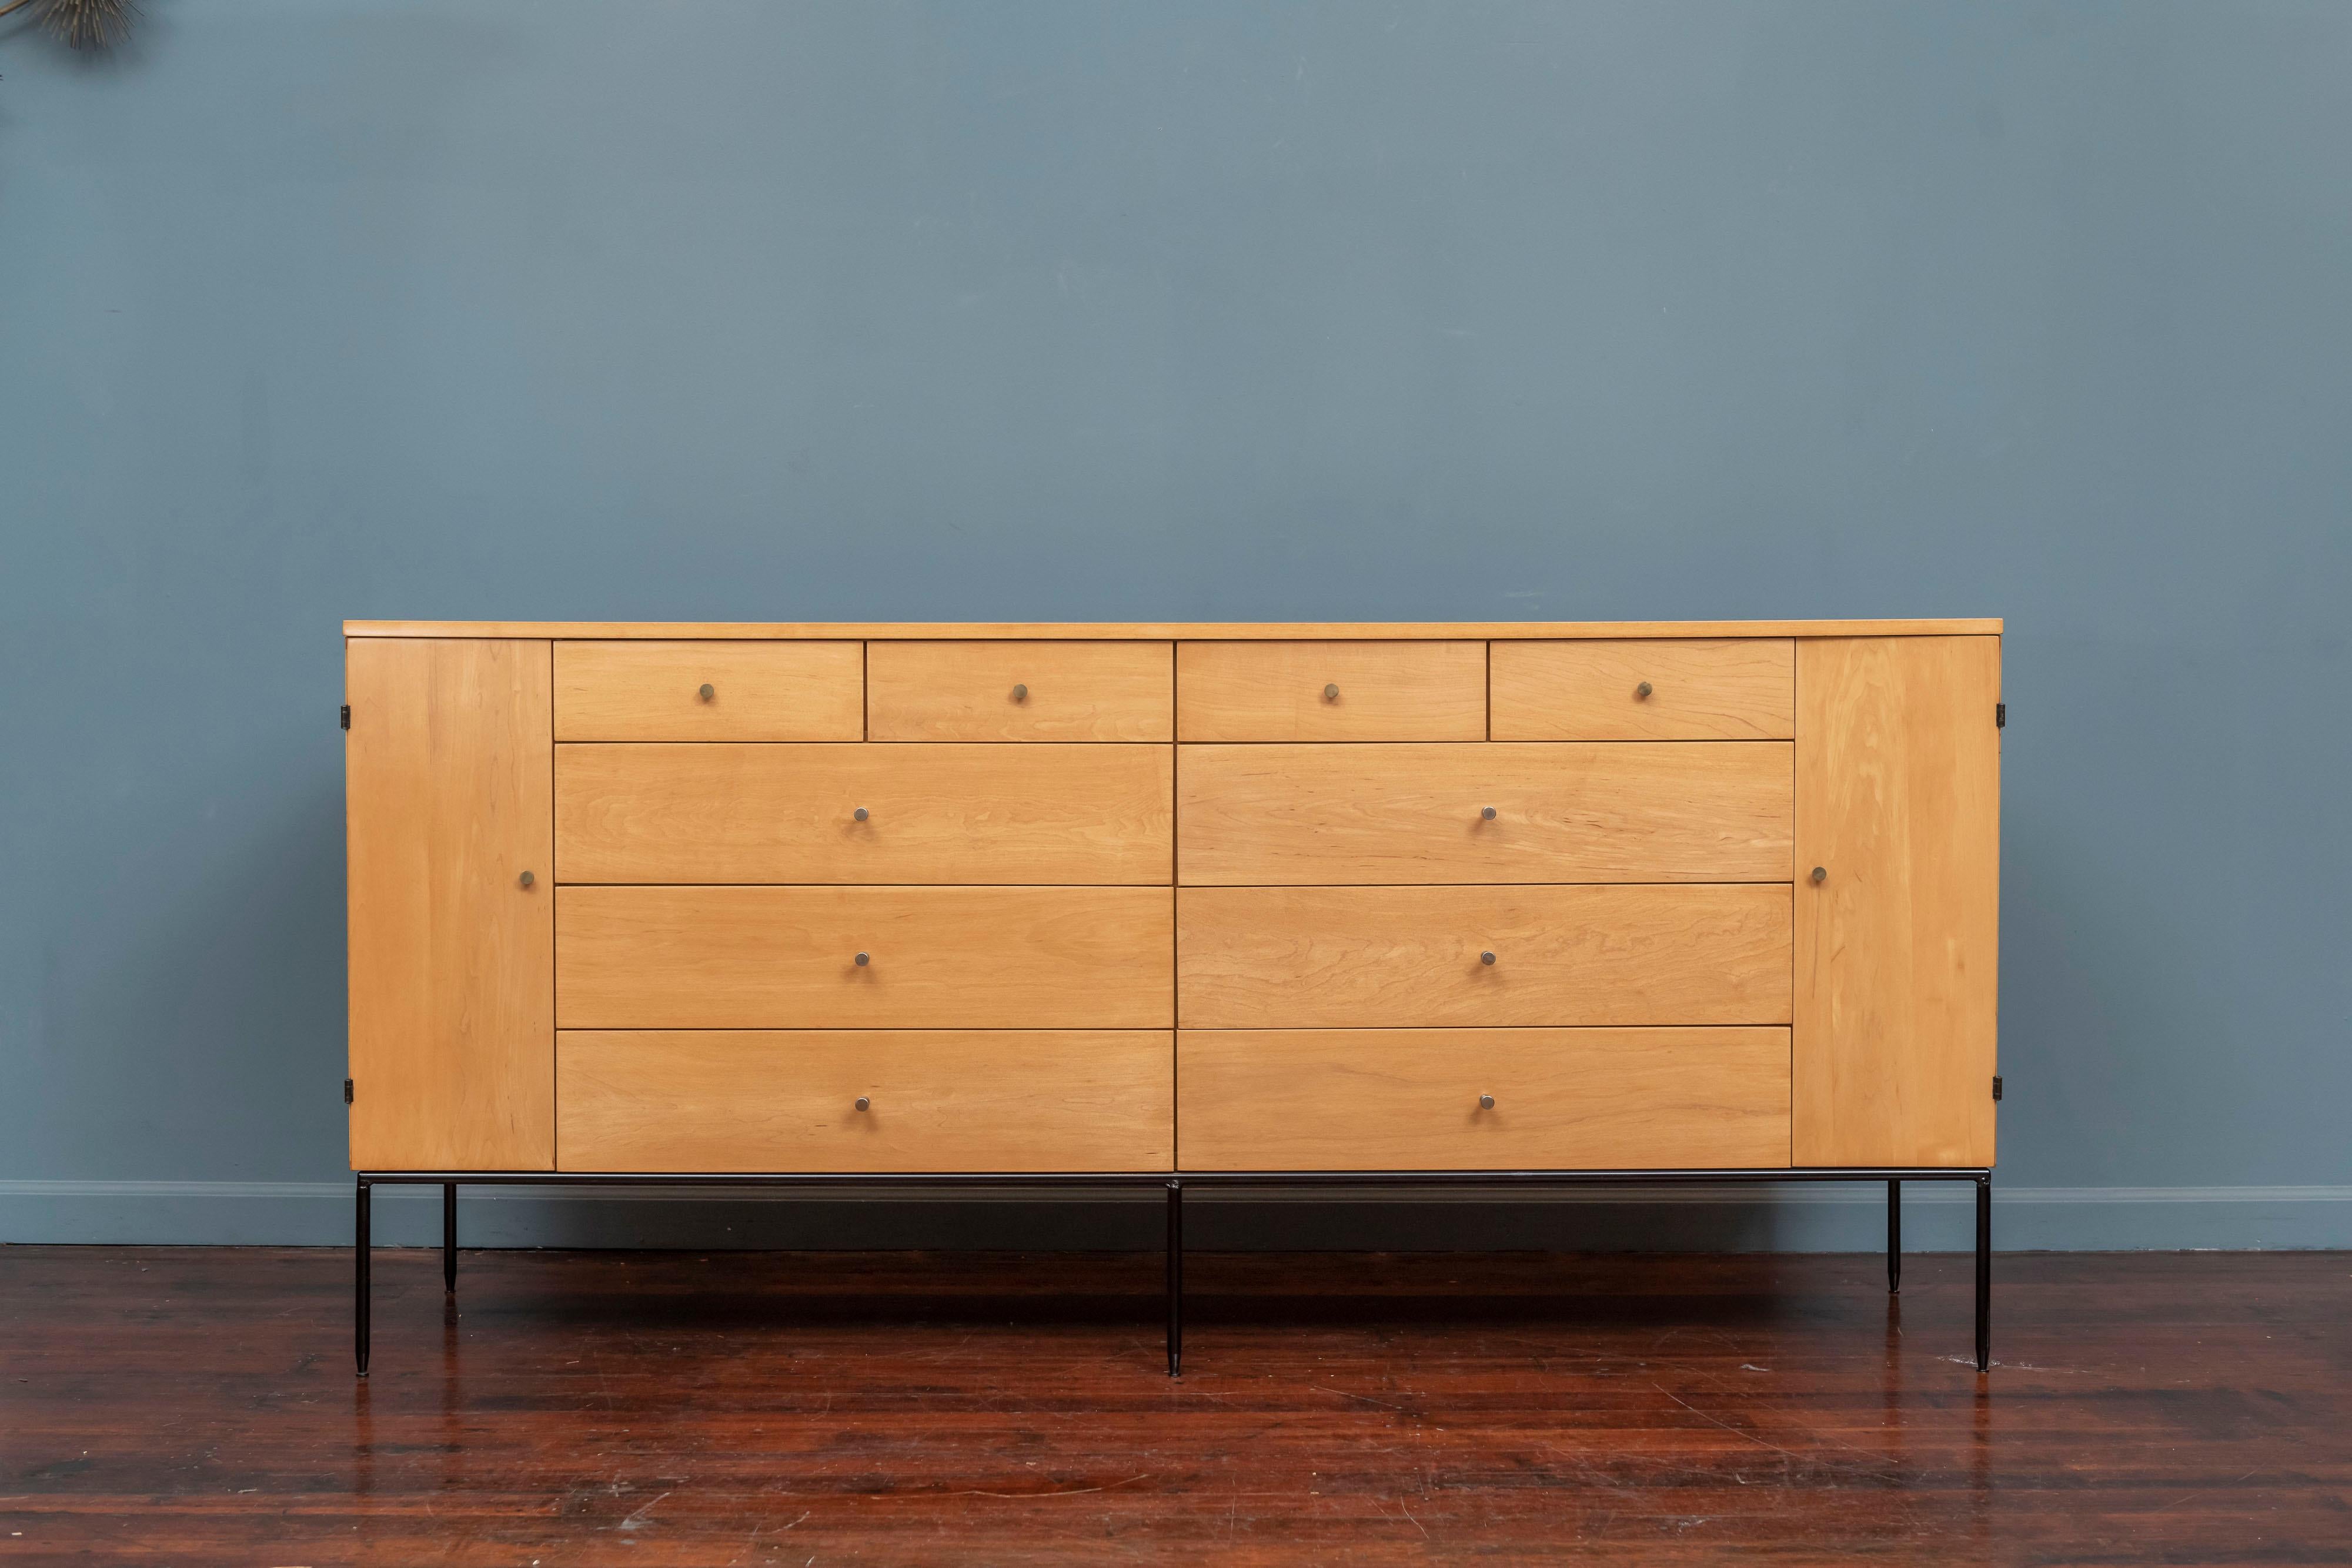 Paul McCobb design 20 drawer dresser for his Planner Group line produced by Winchendon, Massachusetts. Rare early example in solid maple with a lacquered steel six leg base and original hardware, newly refinished and ready to be installed.